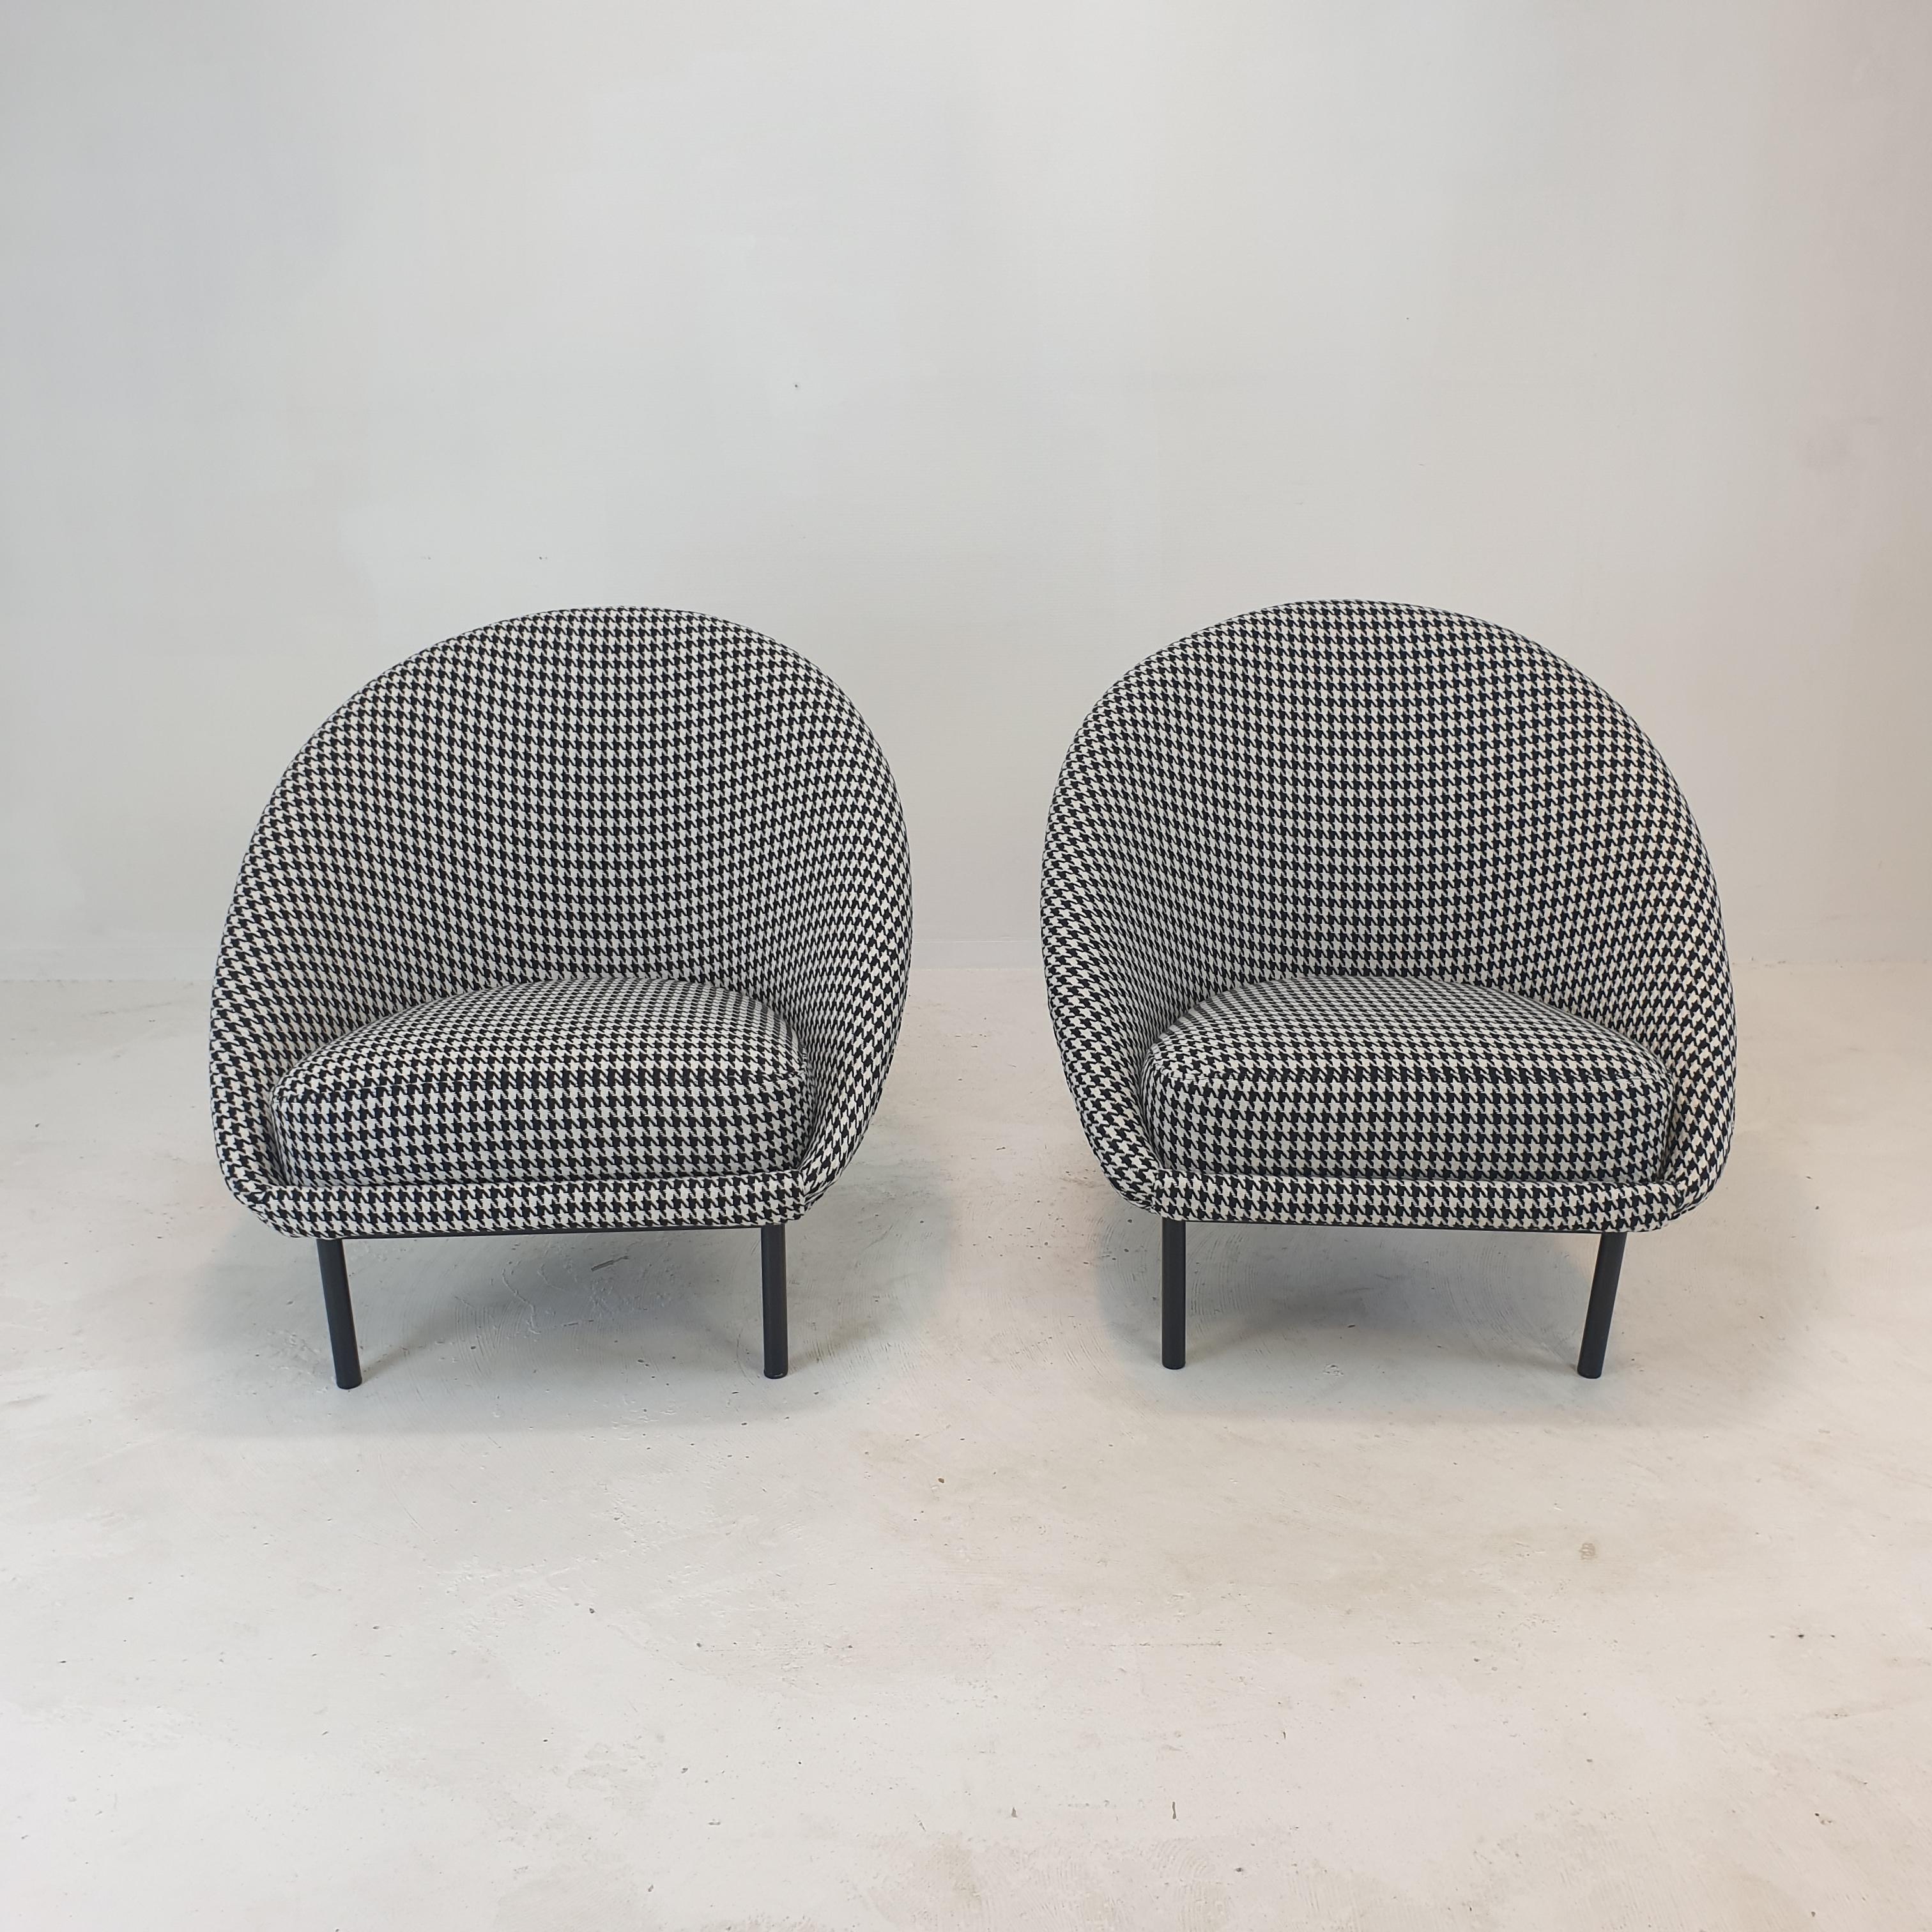 Stunning set of lounge chairs, designed by Theo Ruth for Artifort in the 60's.

The frame of the chairs is executed in an ingenious black coated metal frame. The seat seems to lean into the frame, inviting the sitter to sit down. The seating is